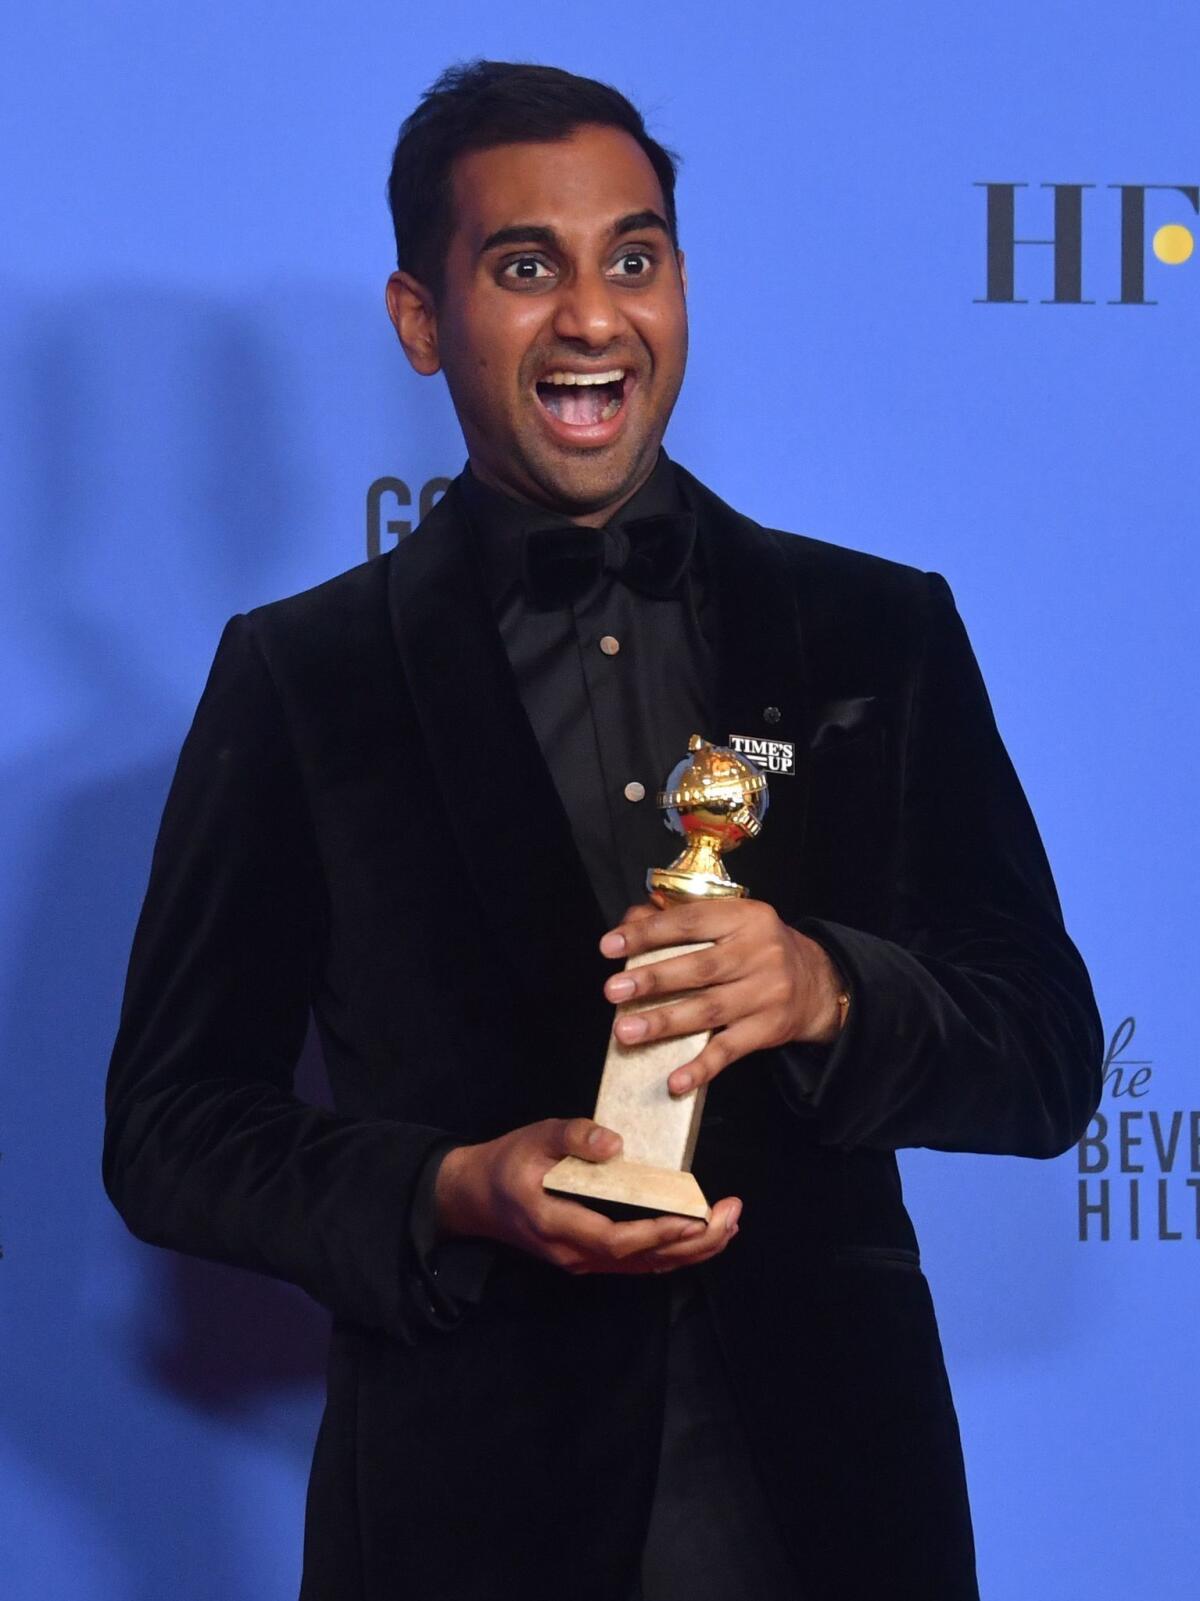 Actor Aziz Ansari backstage at the Golden Globes after his win.